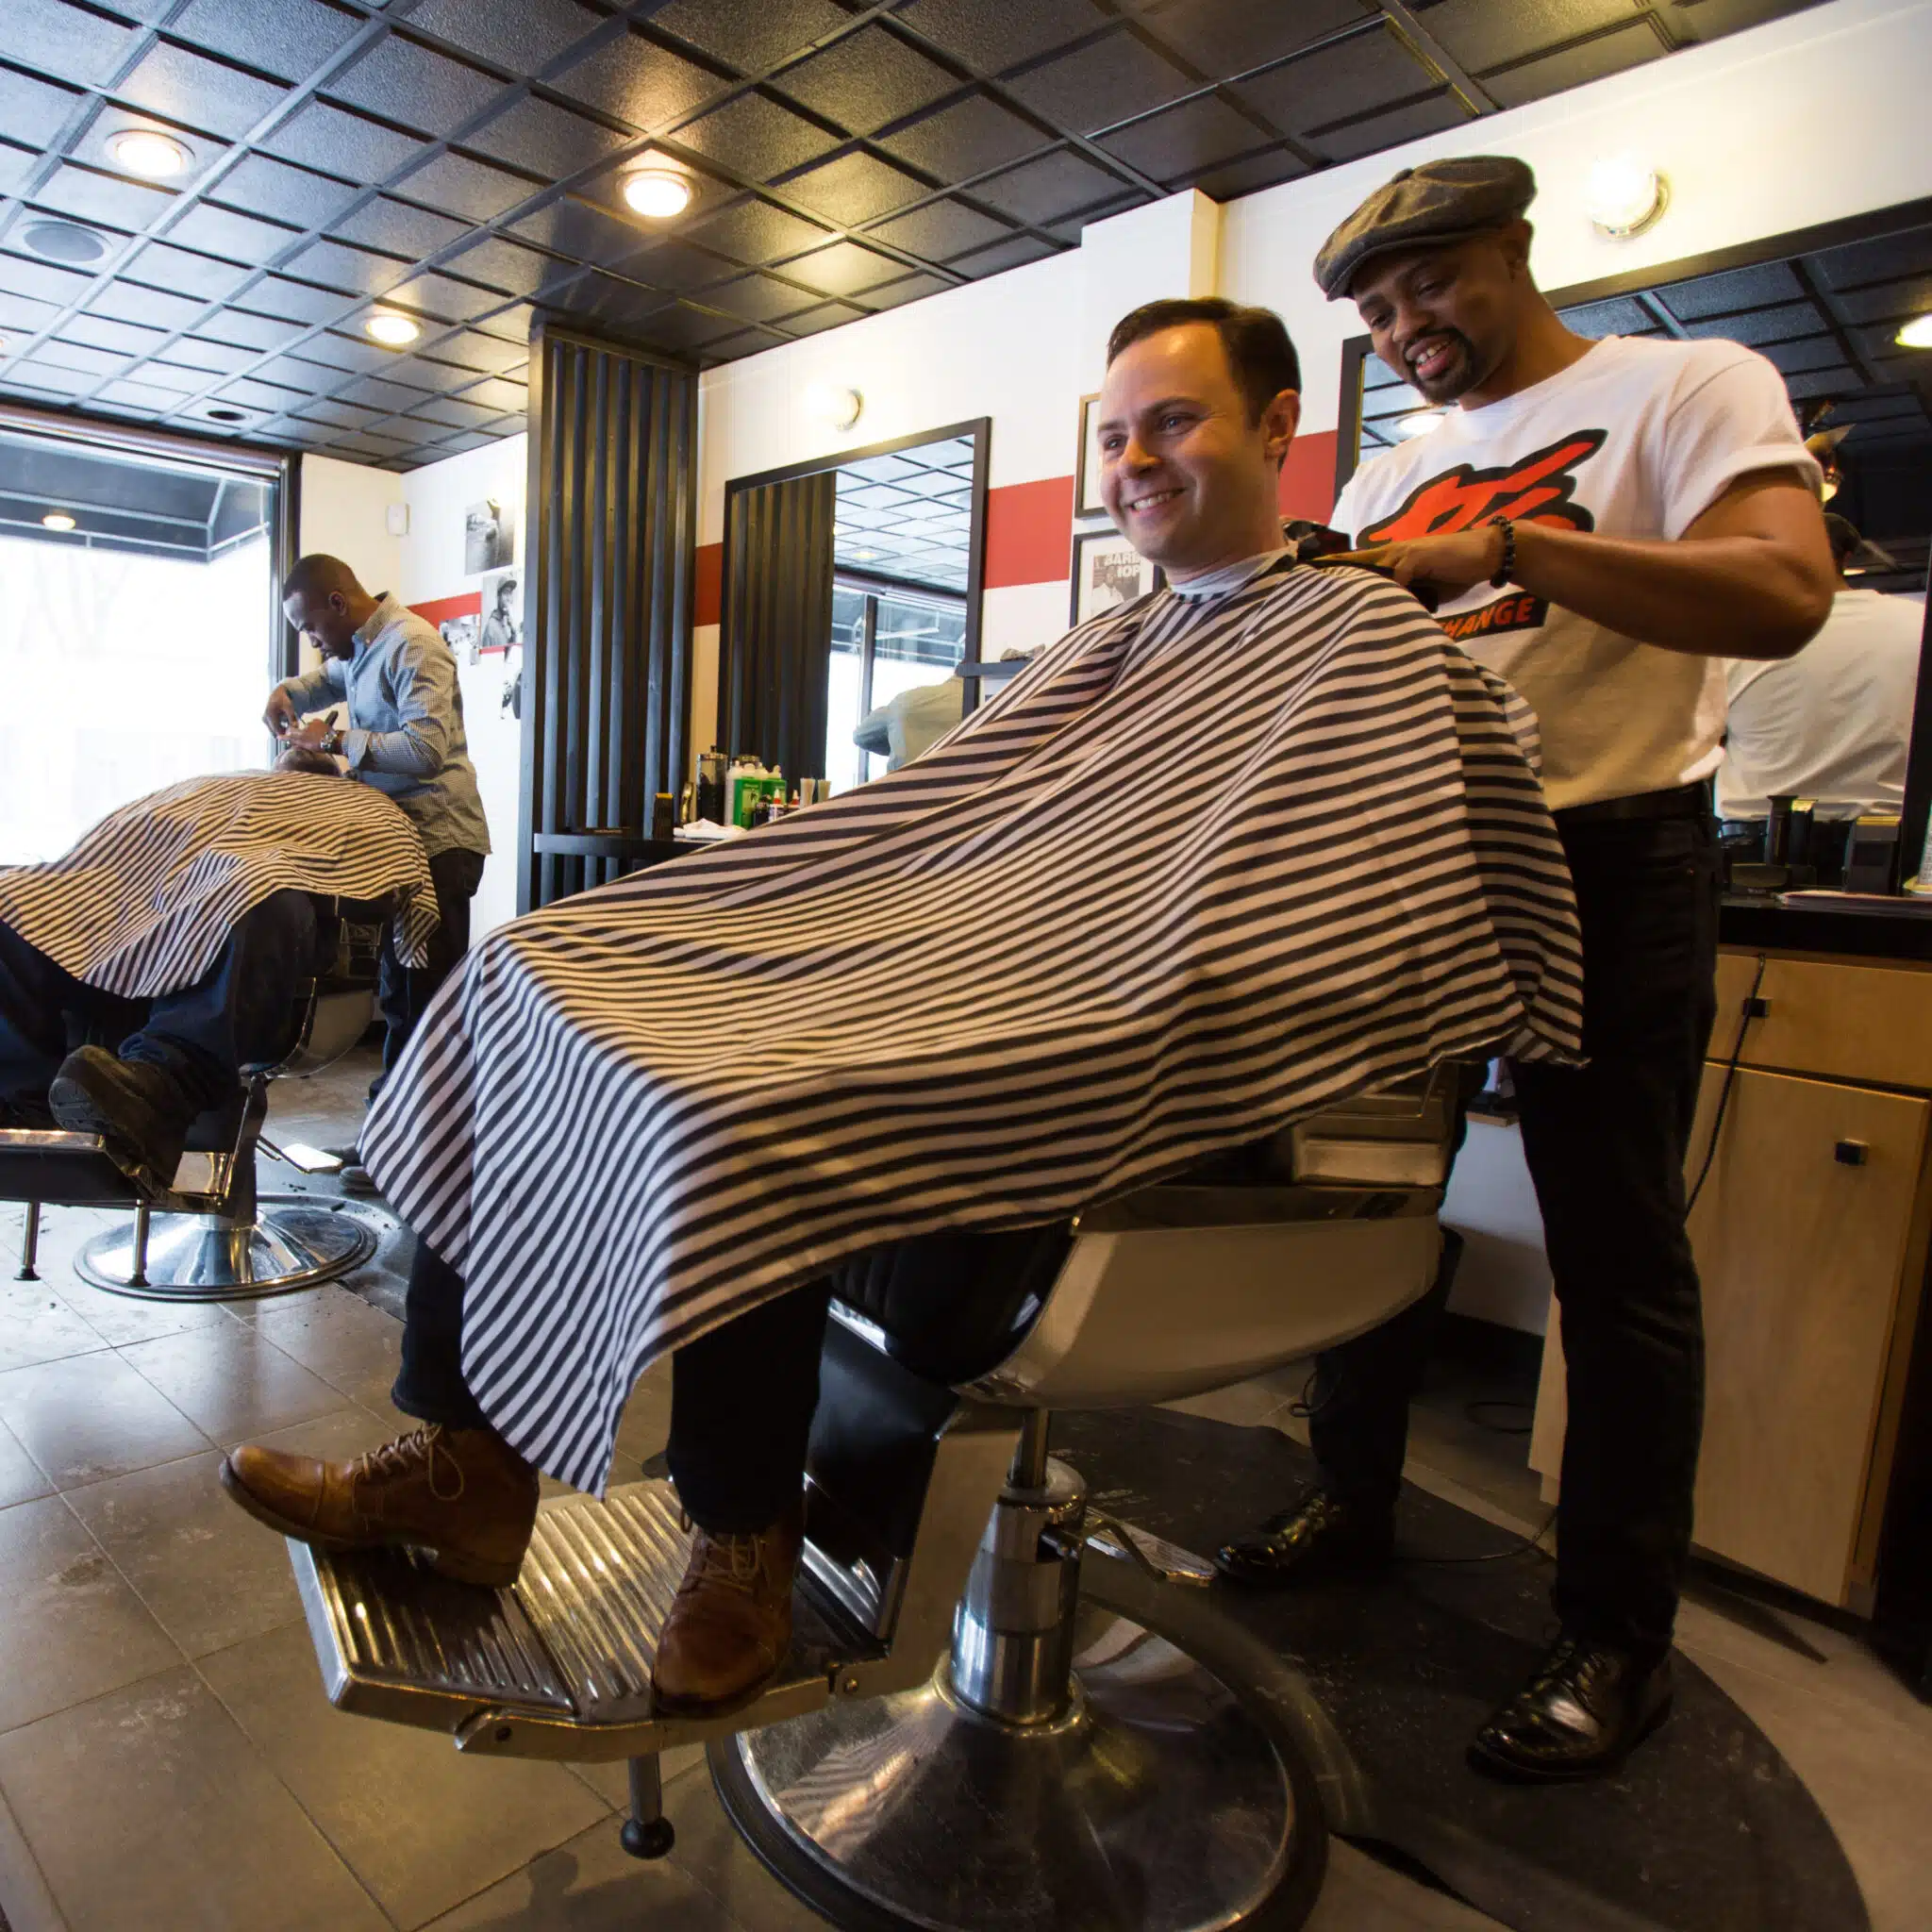 Jake Sturgis, owner of Captivate Media, smiling, getting a haircut in a barbershop.